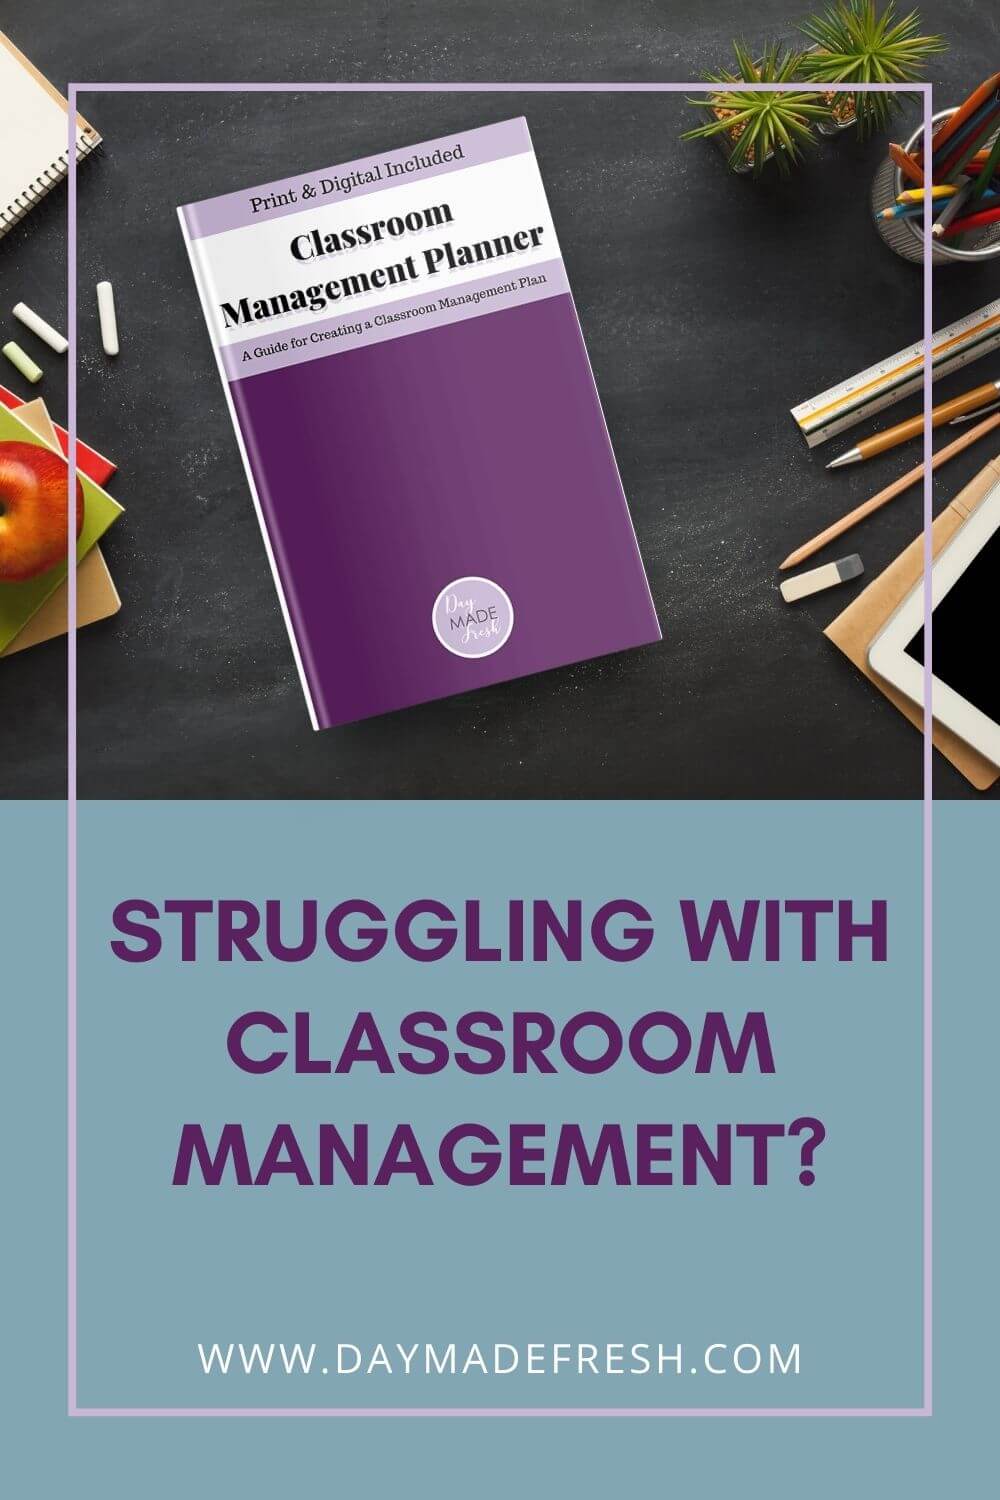 Image Text: Struggling with Classroom Management?; Black desk with purple book that says Classroom Management Planner